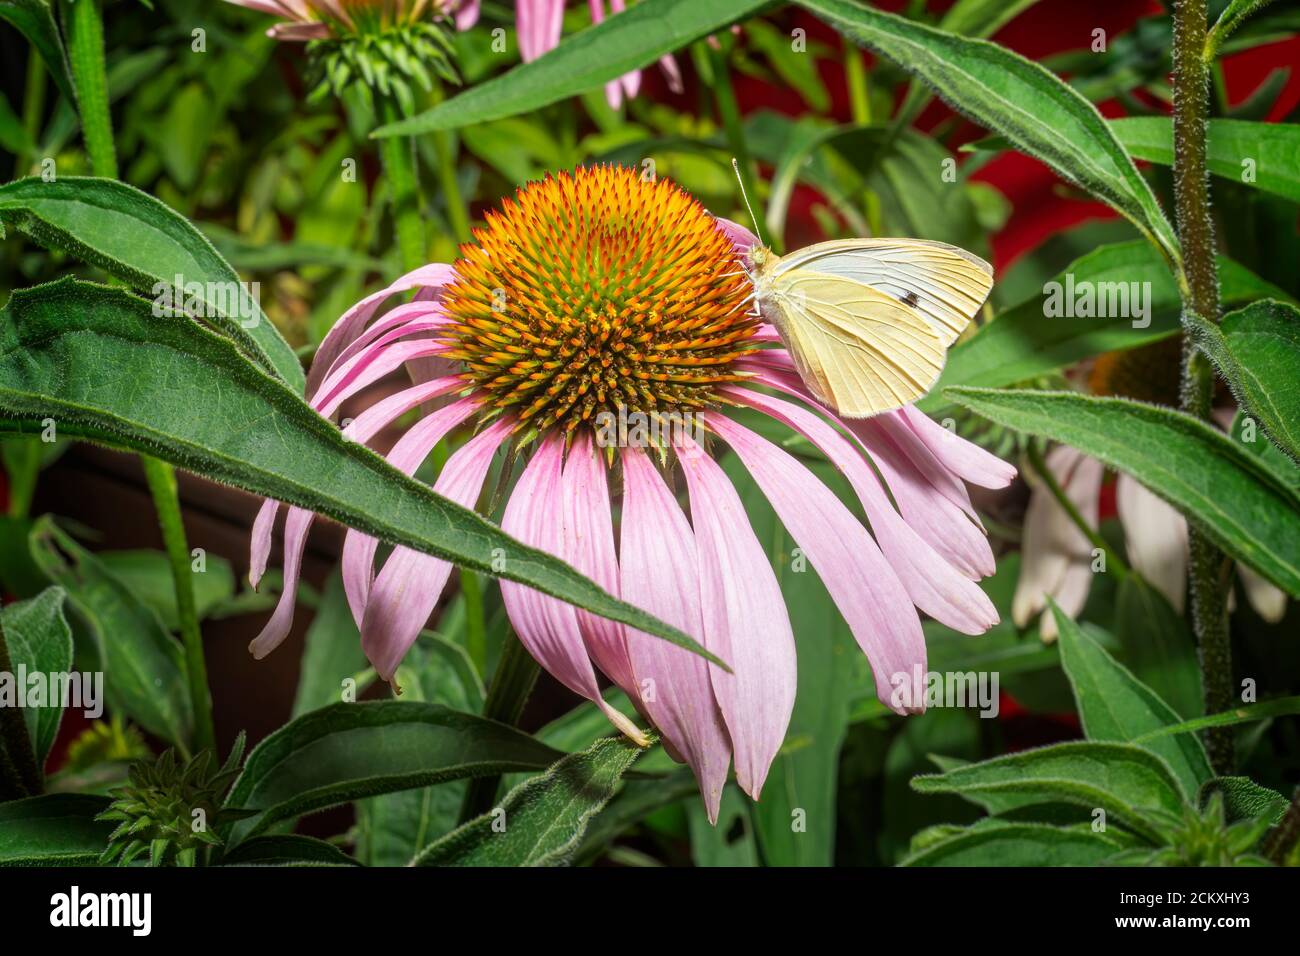 CABBAGE BUTTERFLY (PIERIS SP.) COLLECTING POLLEN FROM A PURPLE CONE FLOWER, PENNSYLVANIA Stock Photo